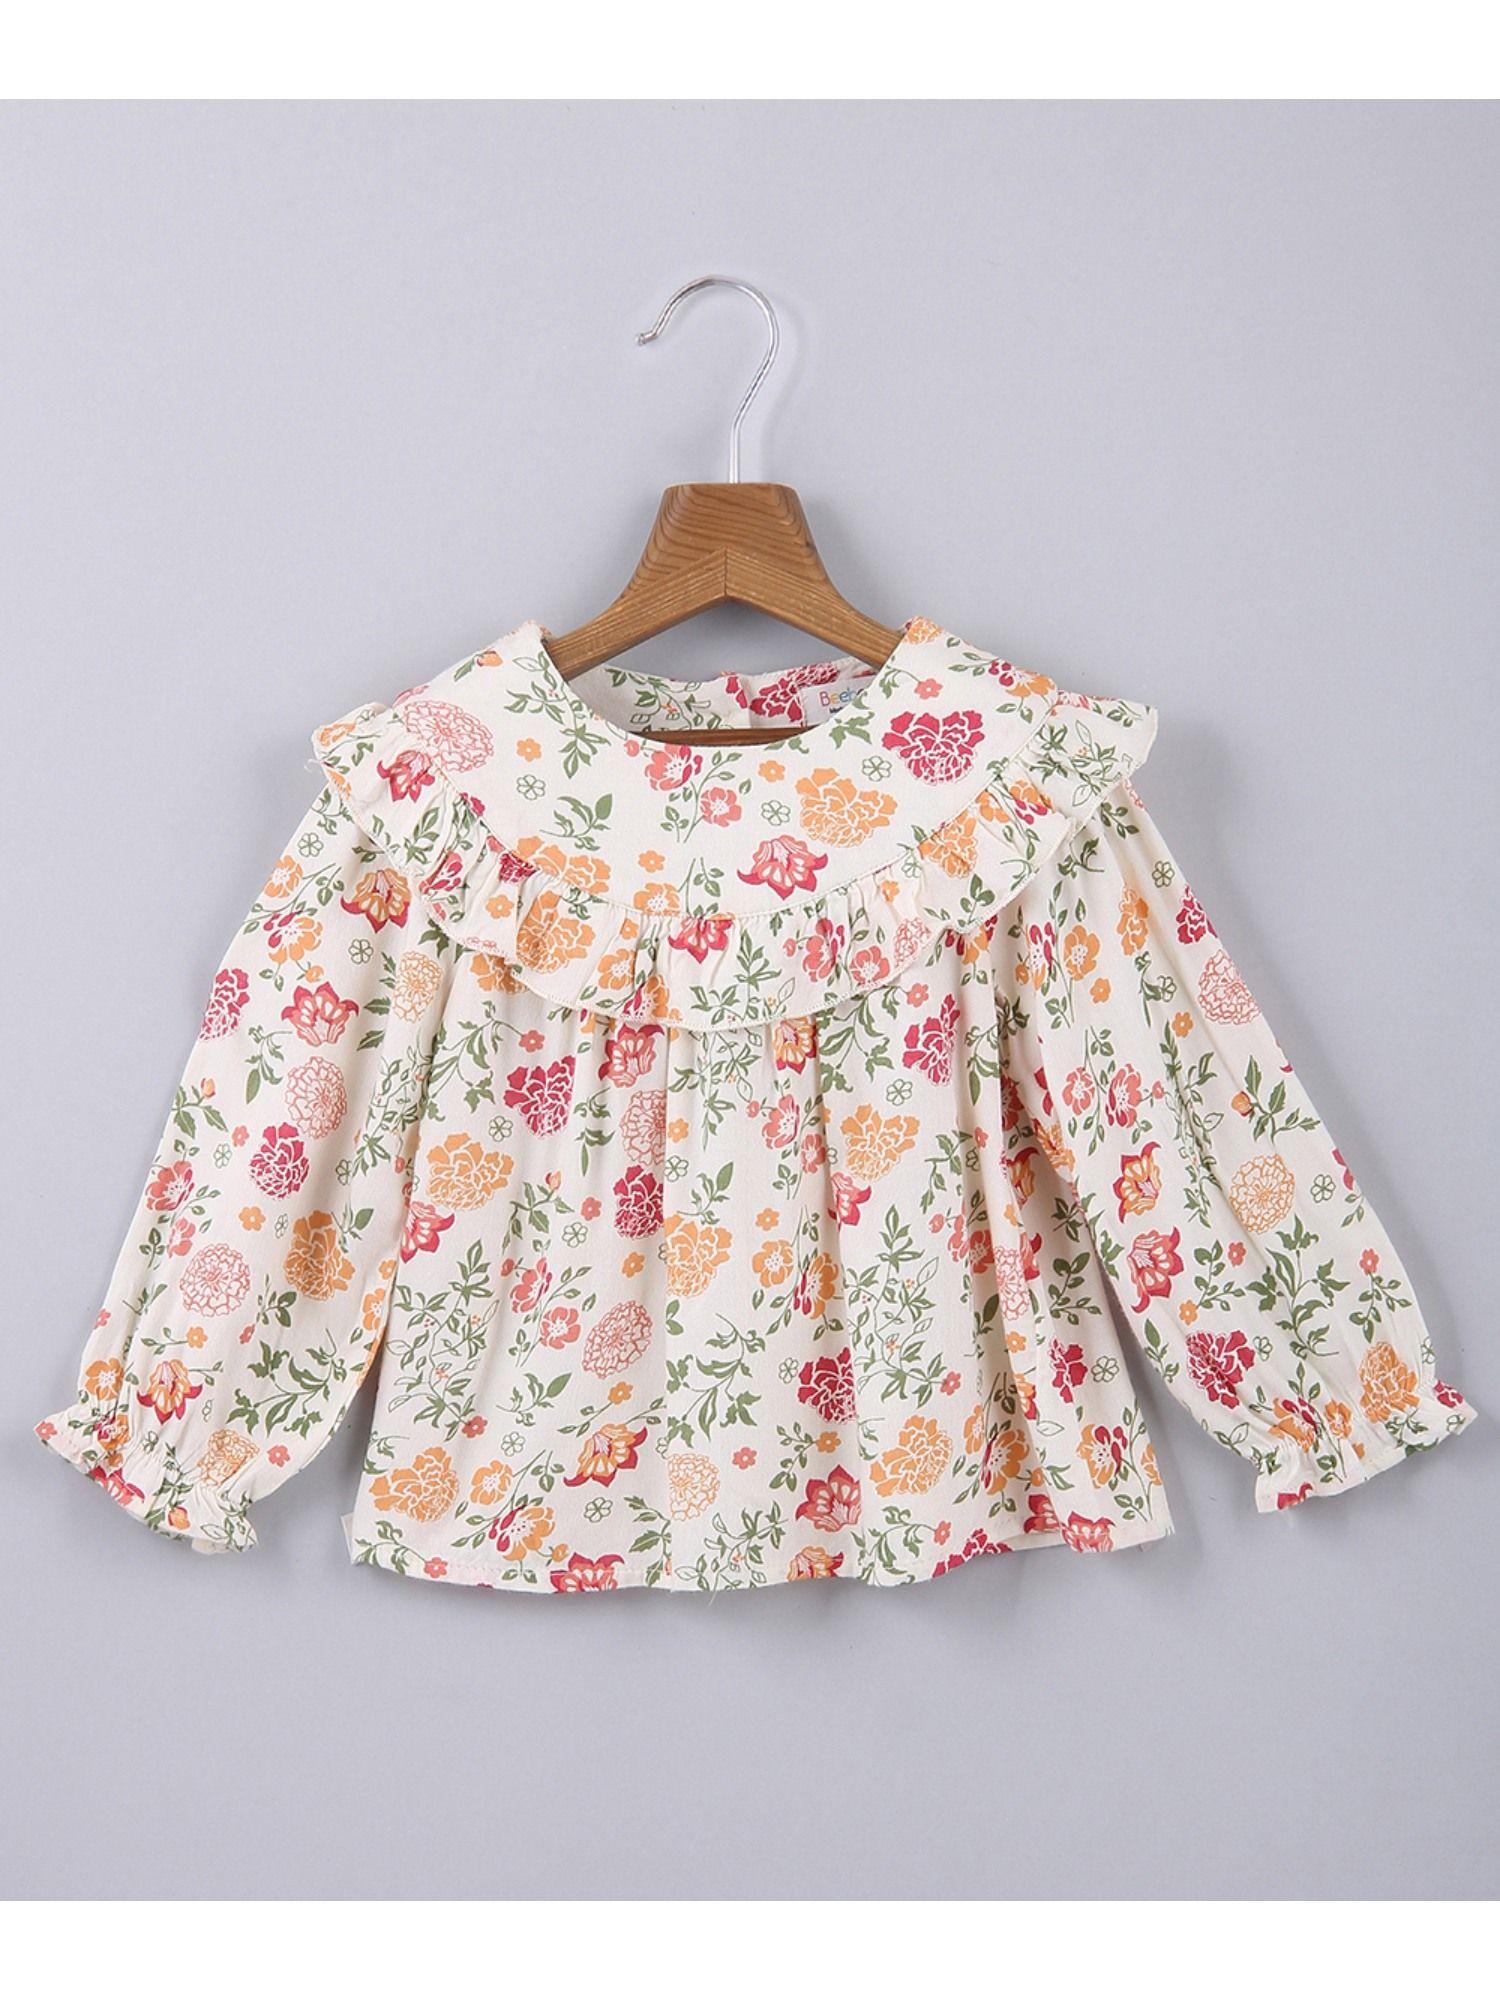 floral printed ruffle cotton top - off white